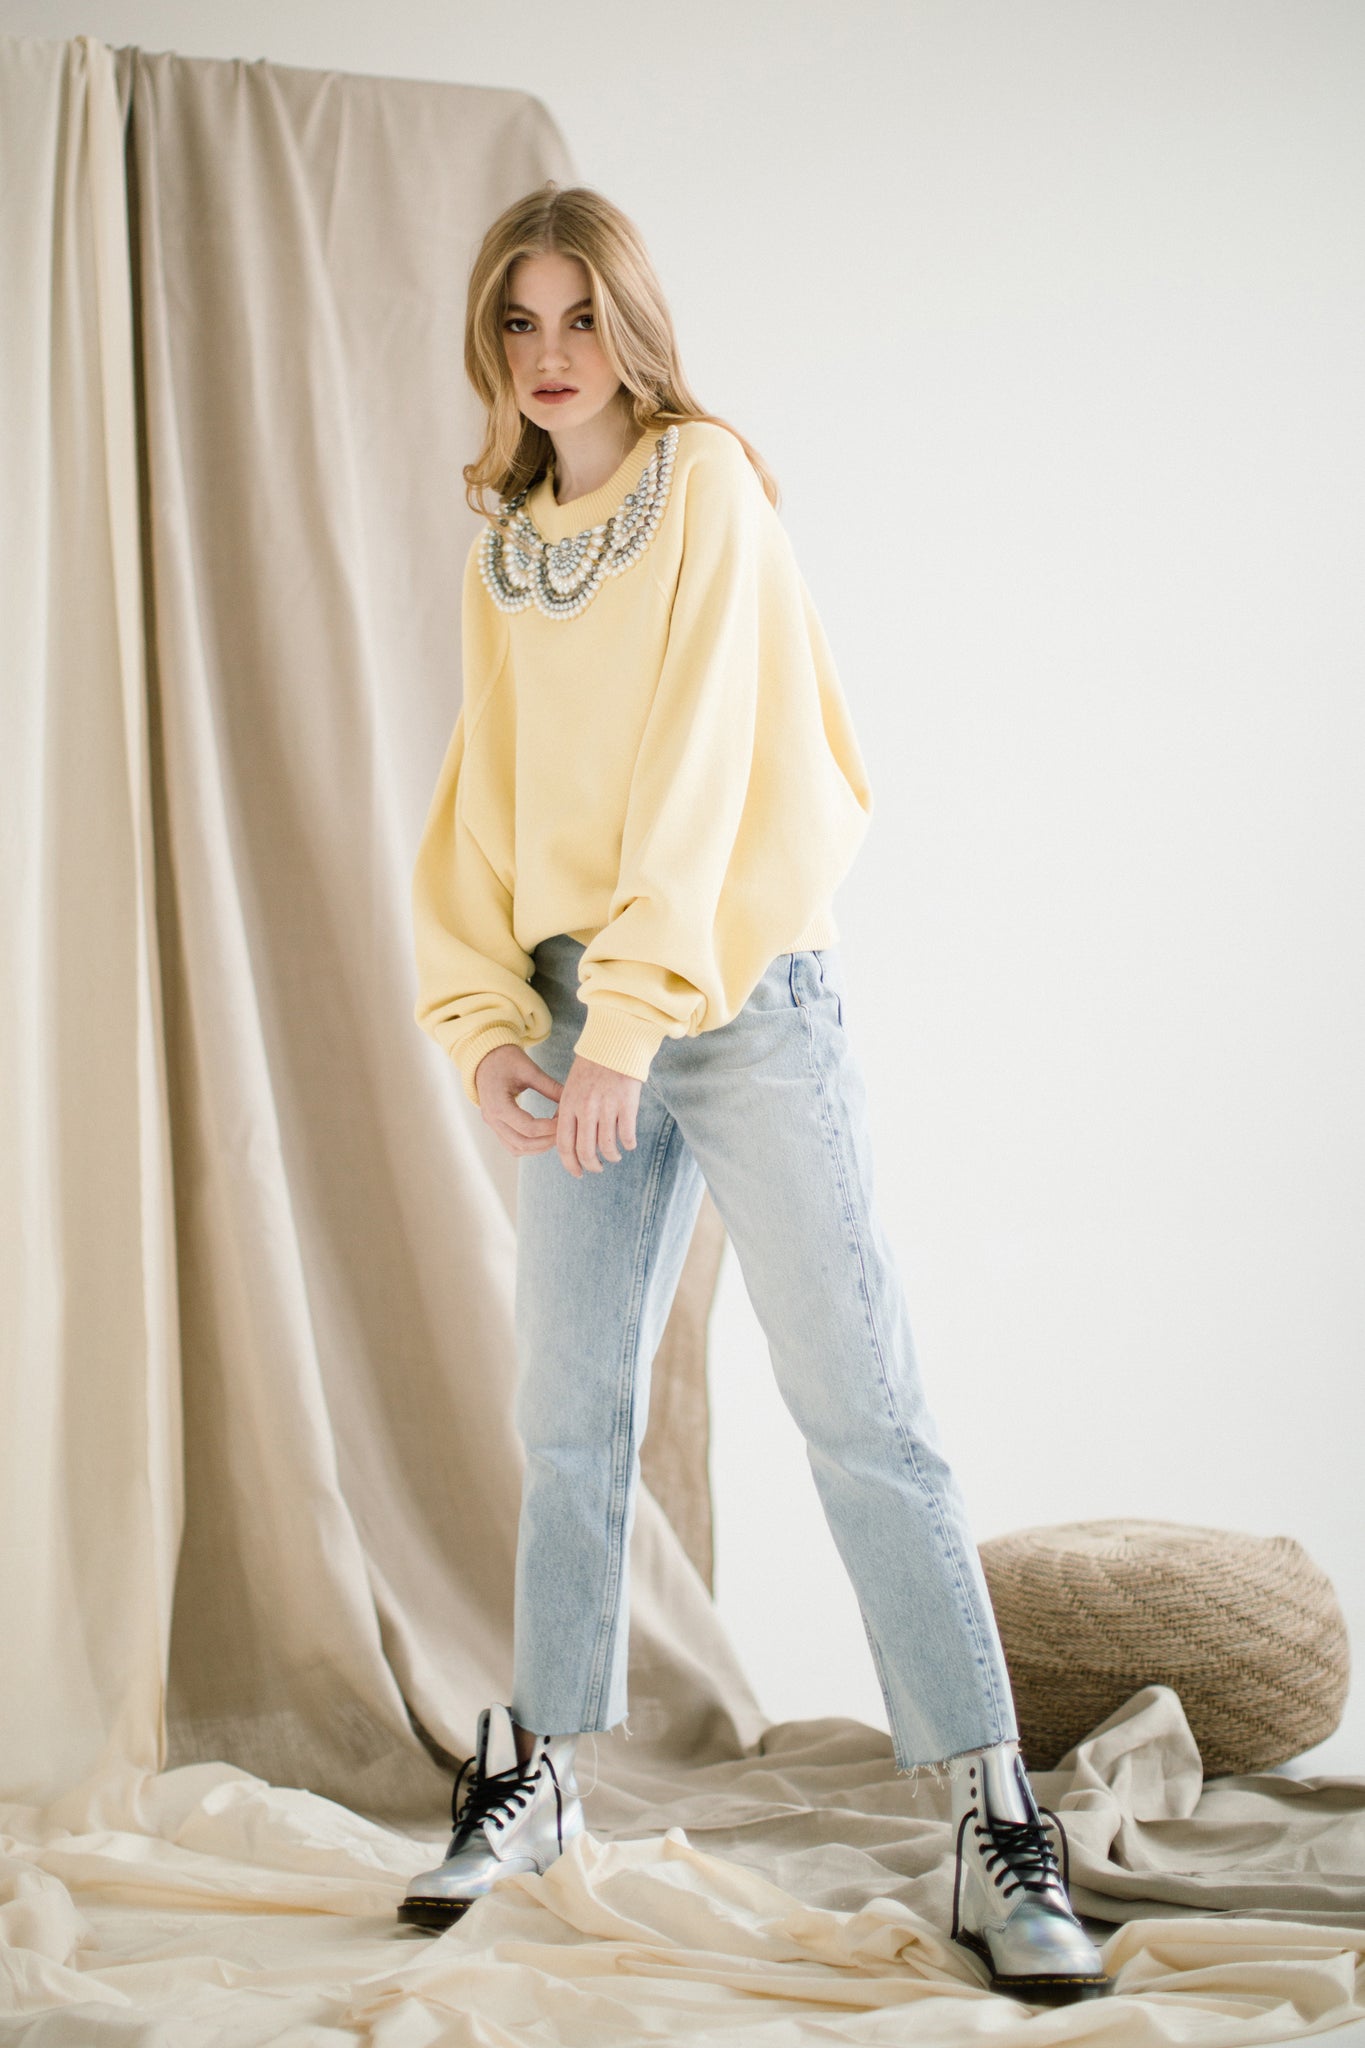 Canary-yellow sweatshirt with beaded ornament | Size S/M